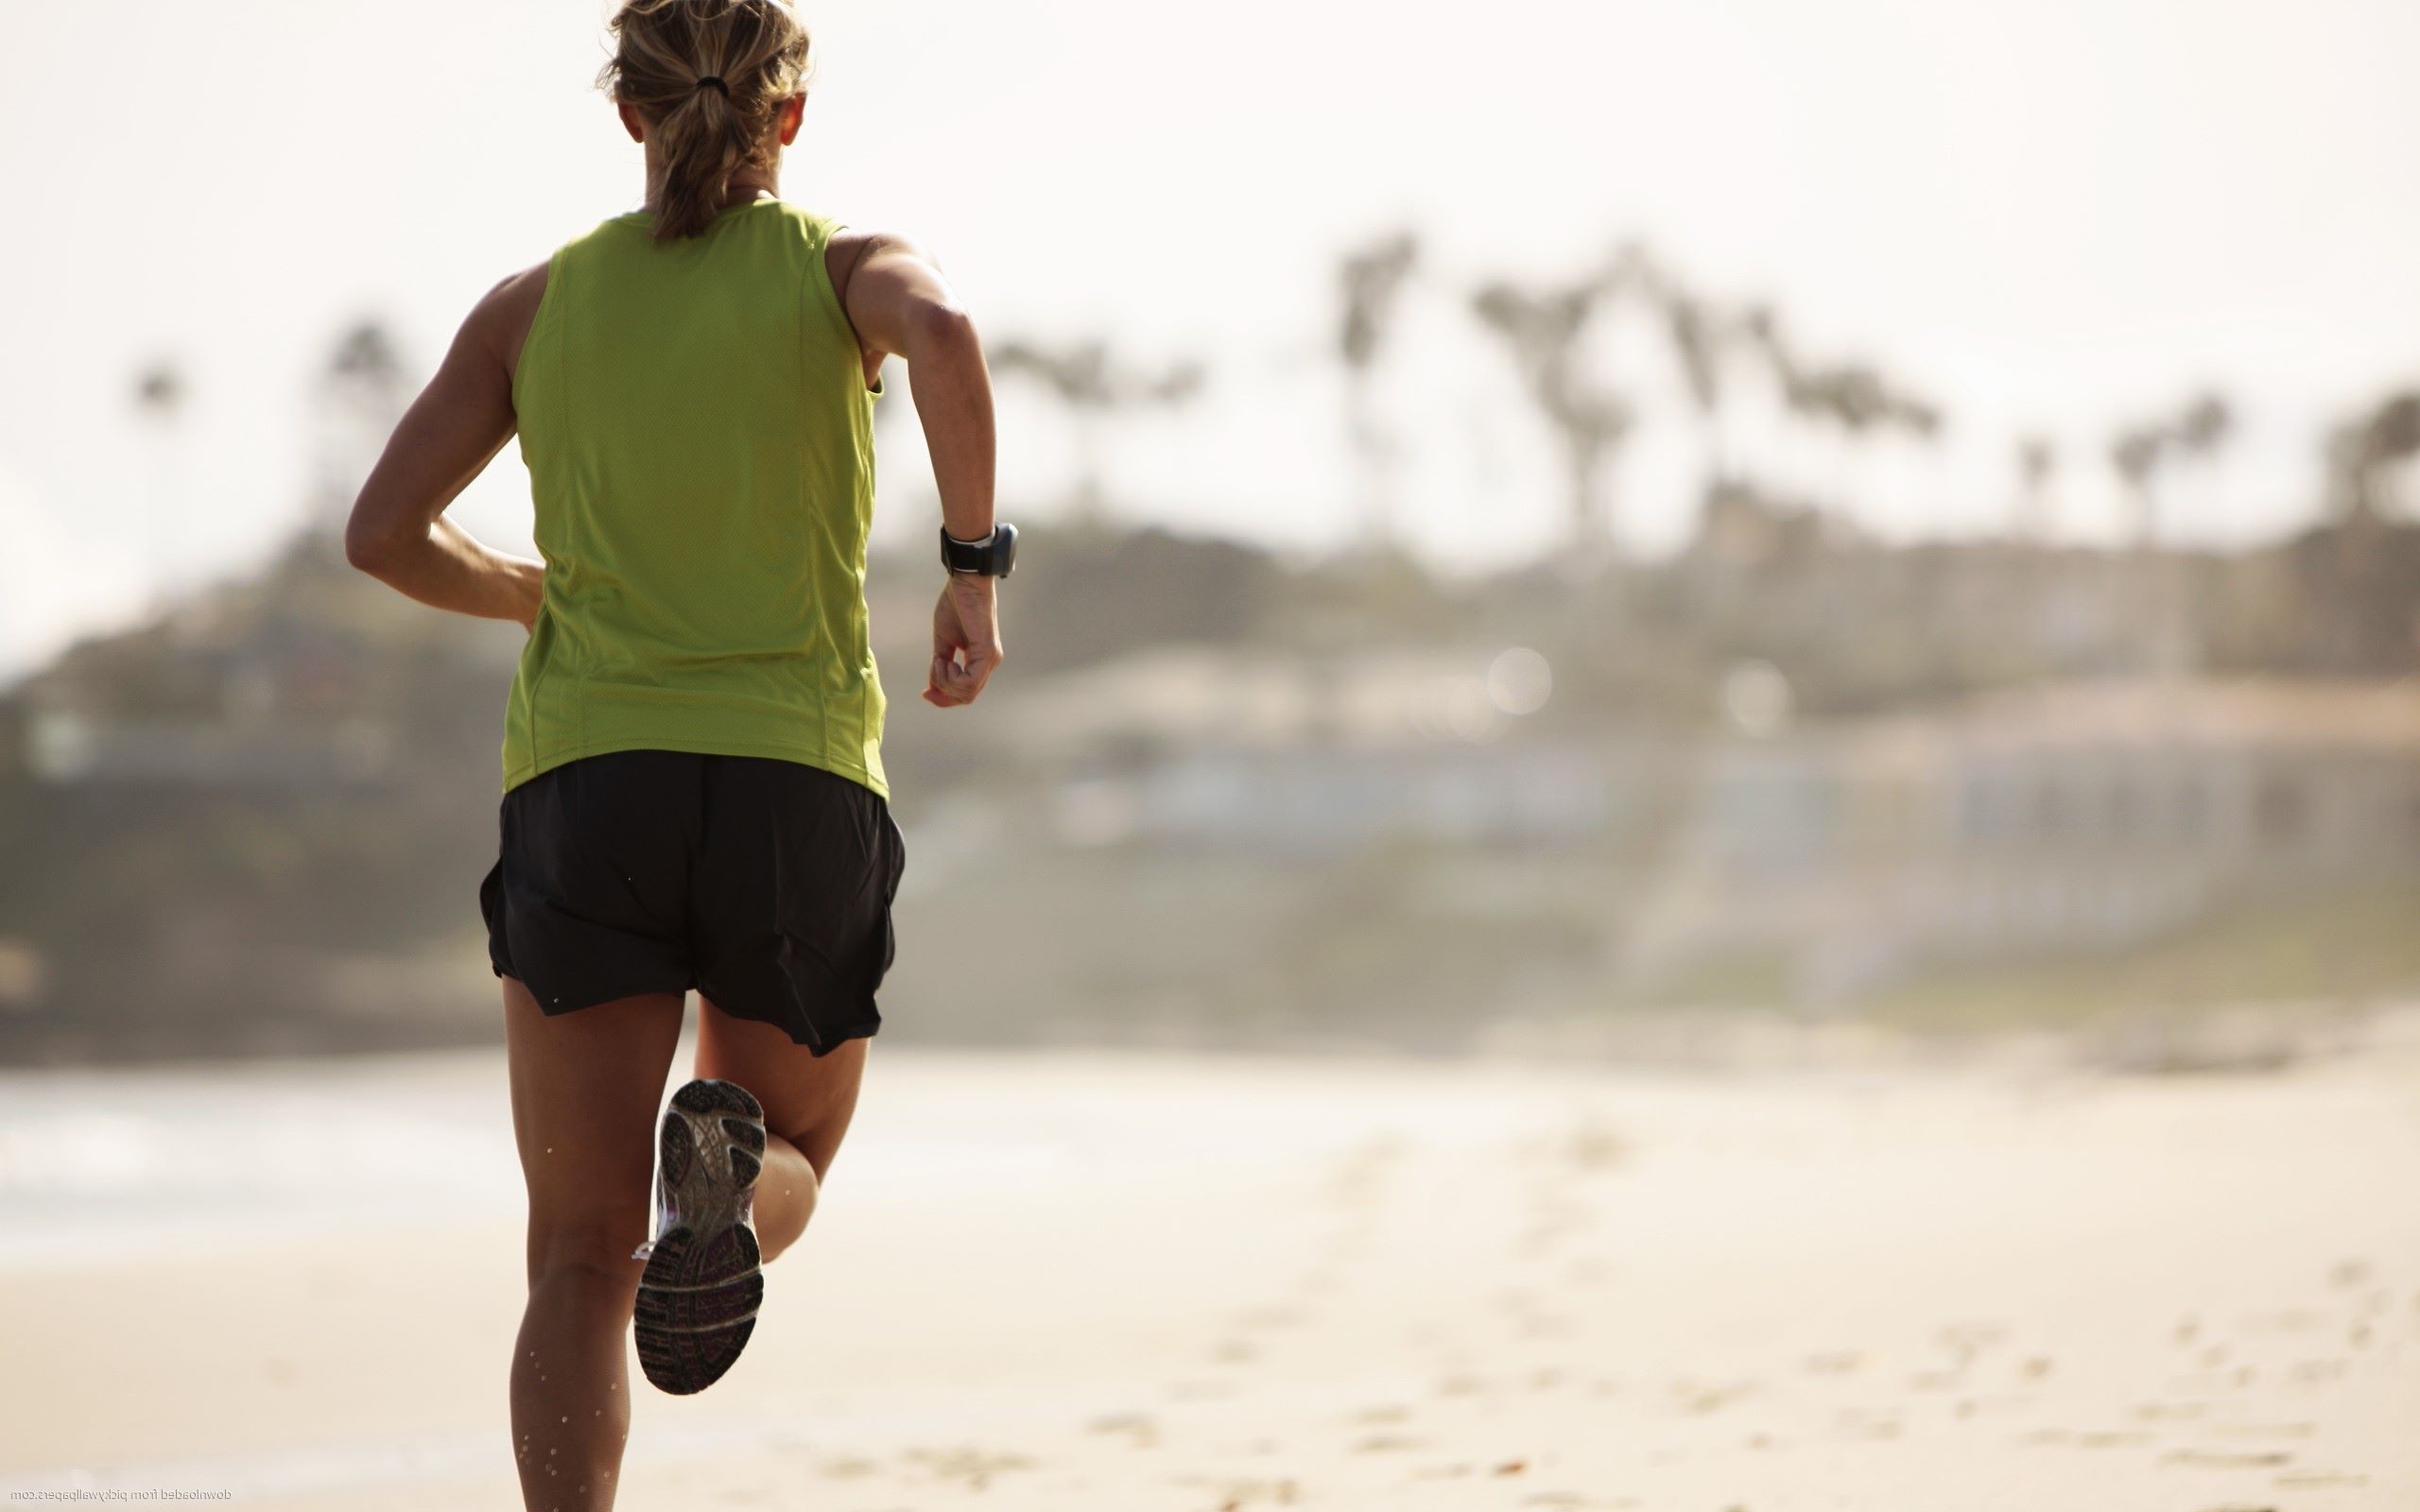 A Beginner's 10-Week Plan For Walking, Jogging, And Running